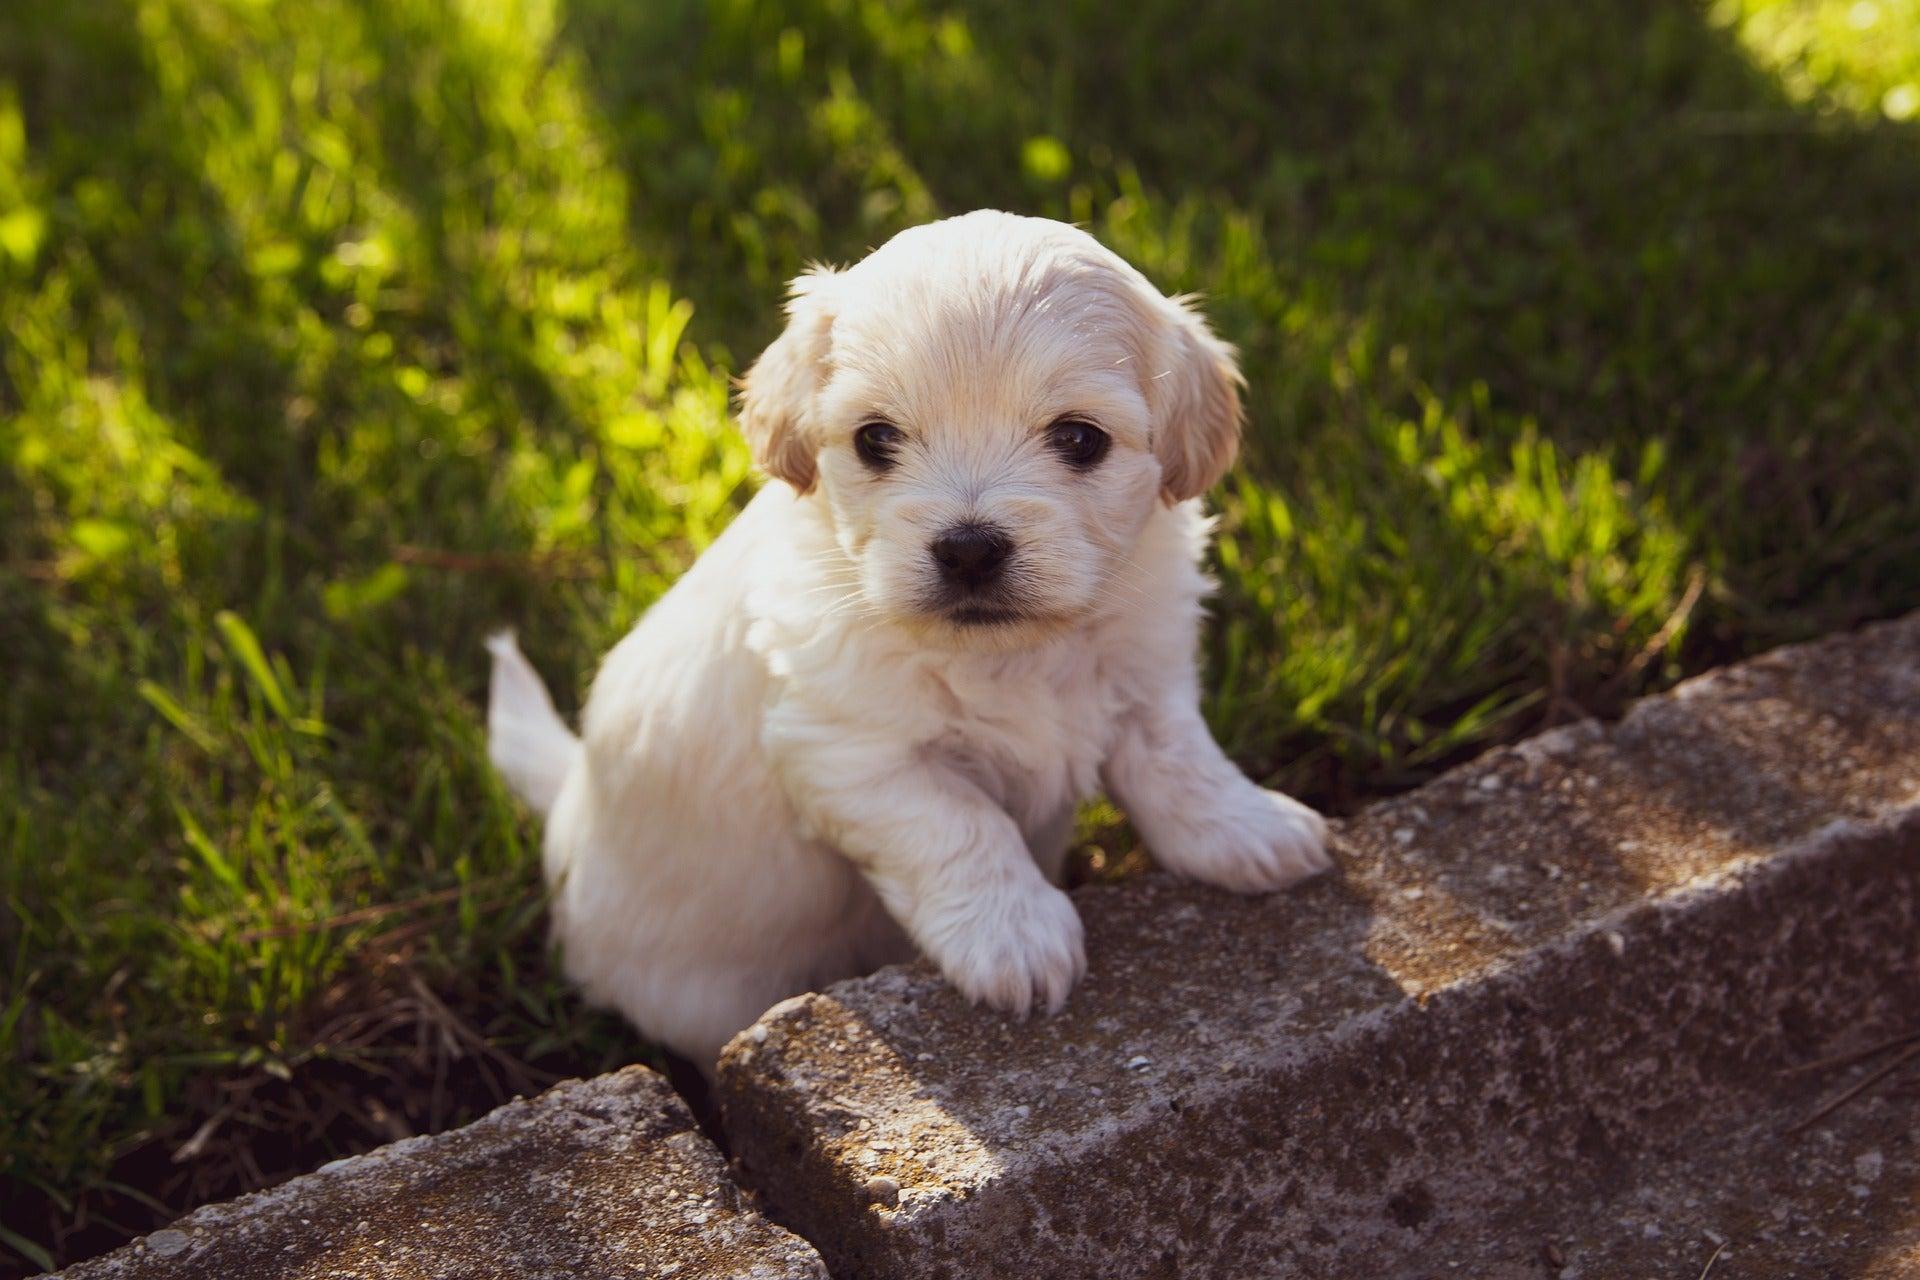 Bringing Home A New Puppy: 7 Things To Remember